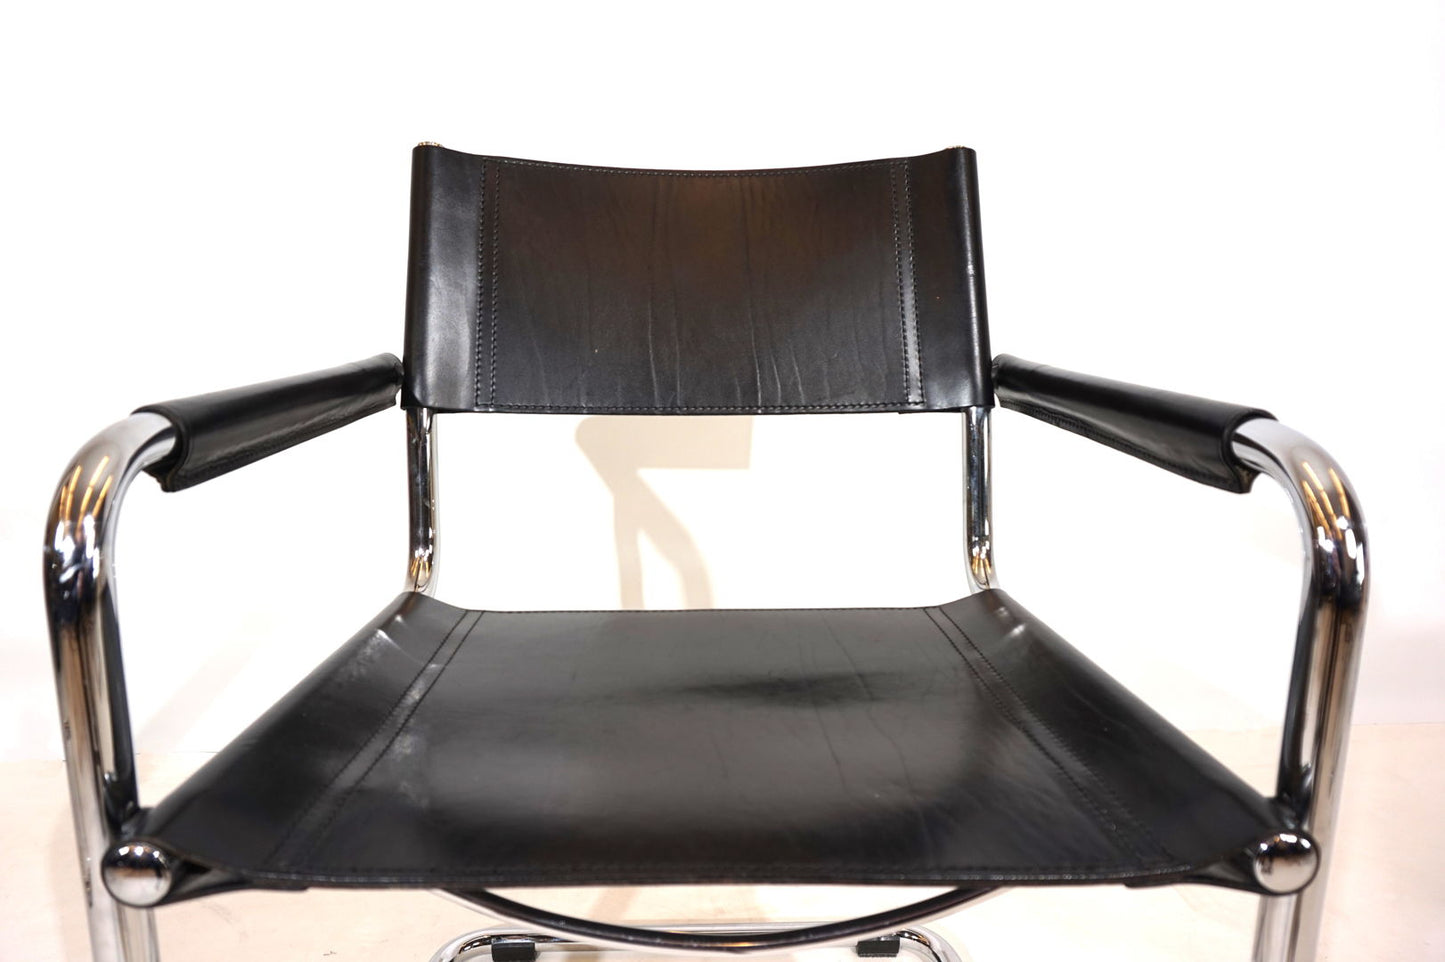 Set of 5 Matteo Grassi MG5 leather dining/conference chairs